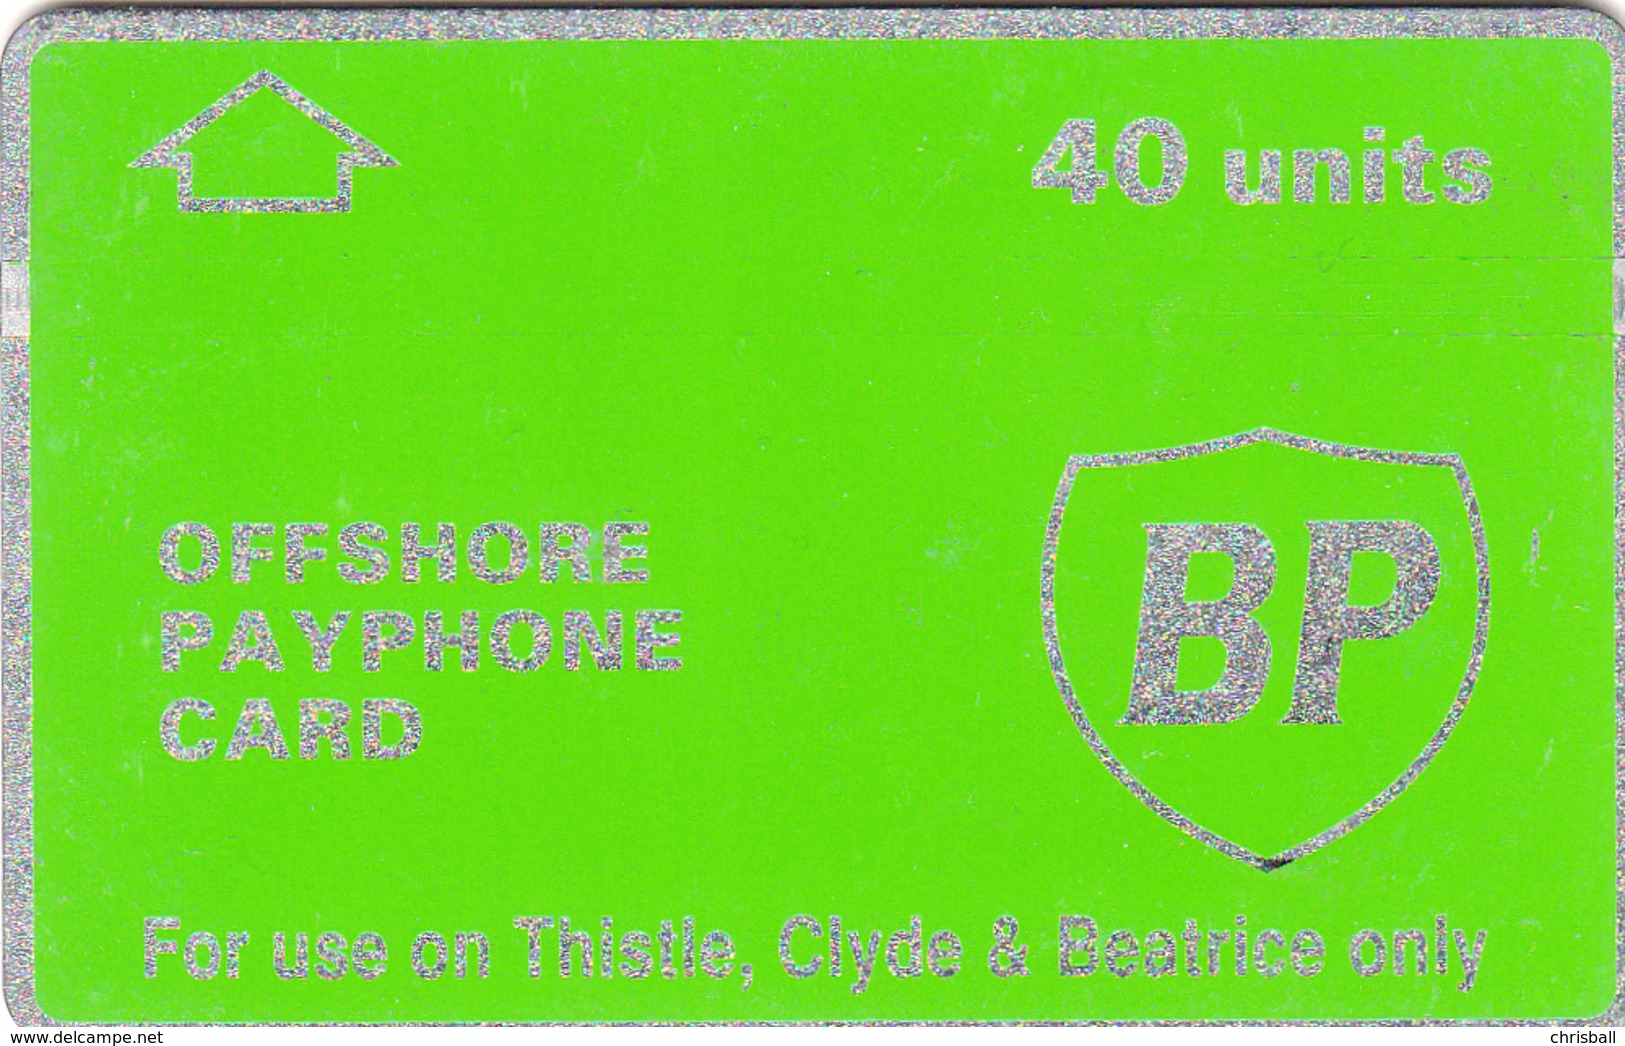 BT Oil Rig Phonecard - British Petroleum 40unit (Clyde Thistle & Beatrice) - Superb Fine Used Condition - [ 2] Oil Drilling Rig